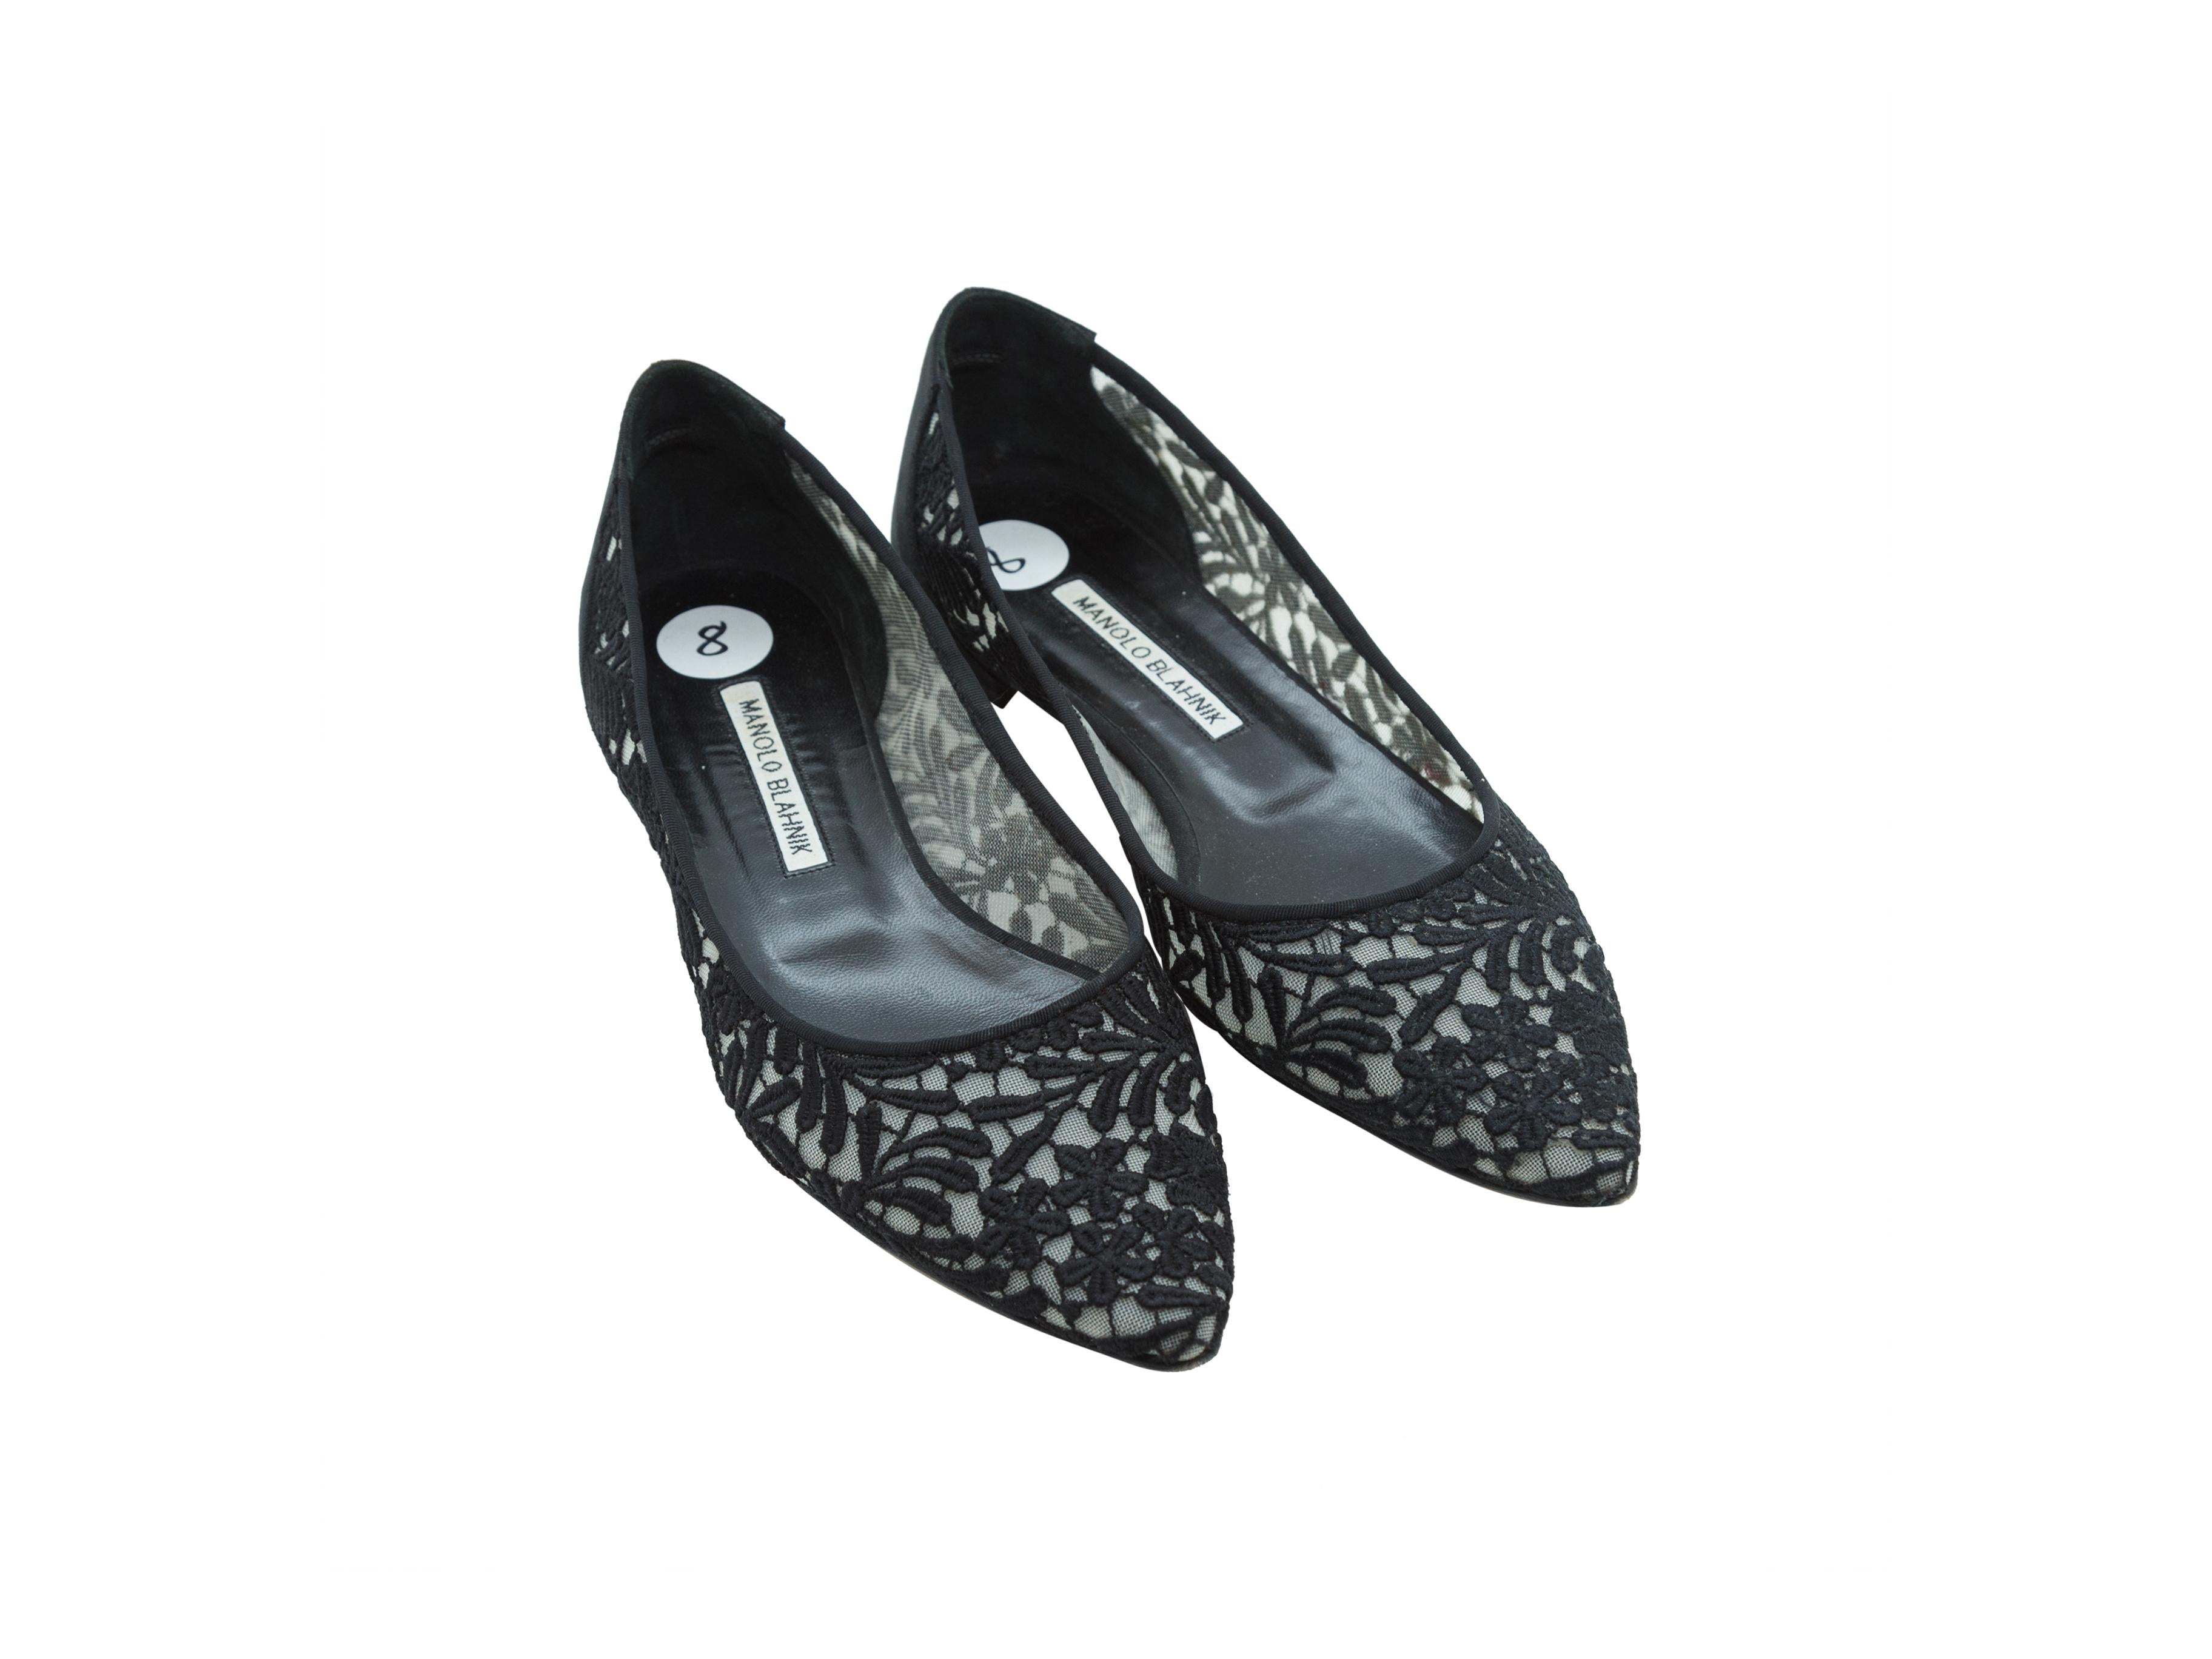 Product details: Black lace pointed-toe flats by Manolo Blahnik. Tonal stitching throughout. Covered heels. Designer size 38. 0.6